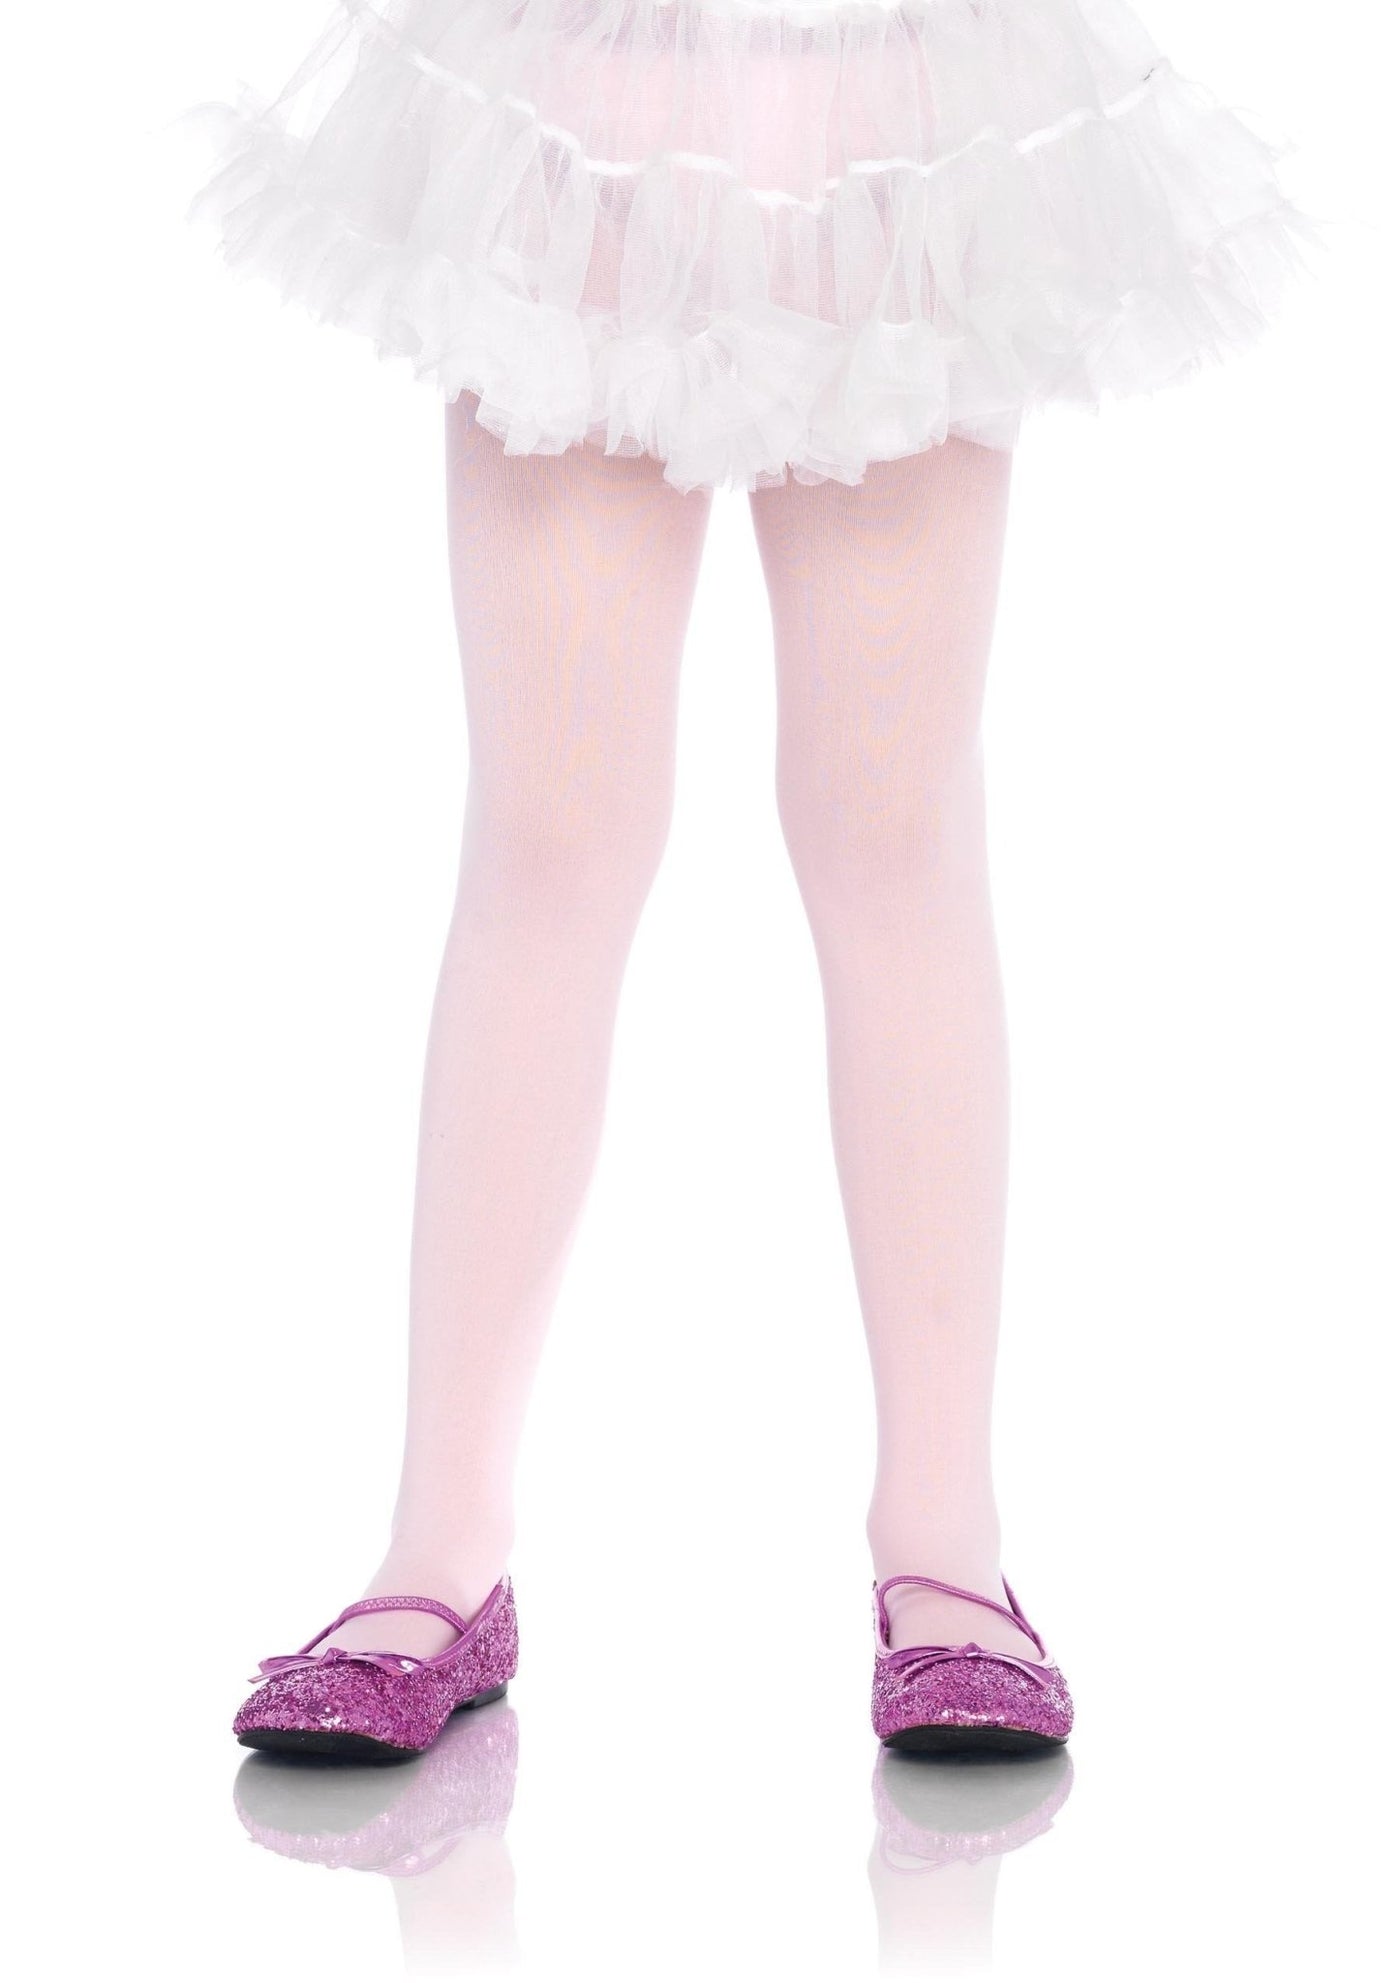 Girls Opaque Tights LEG-4646 NEON PINK 7-10 - JJ's Party House